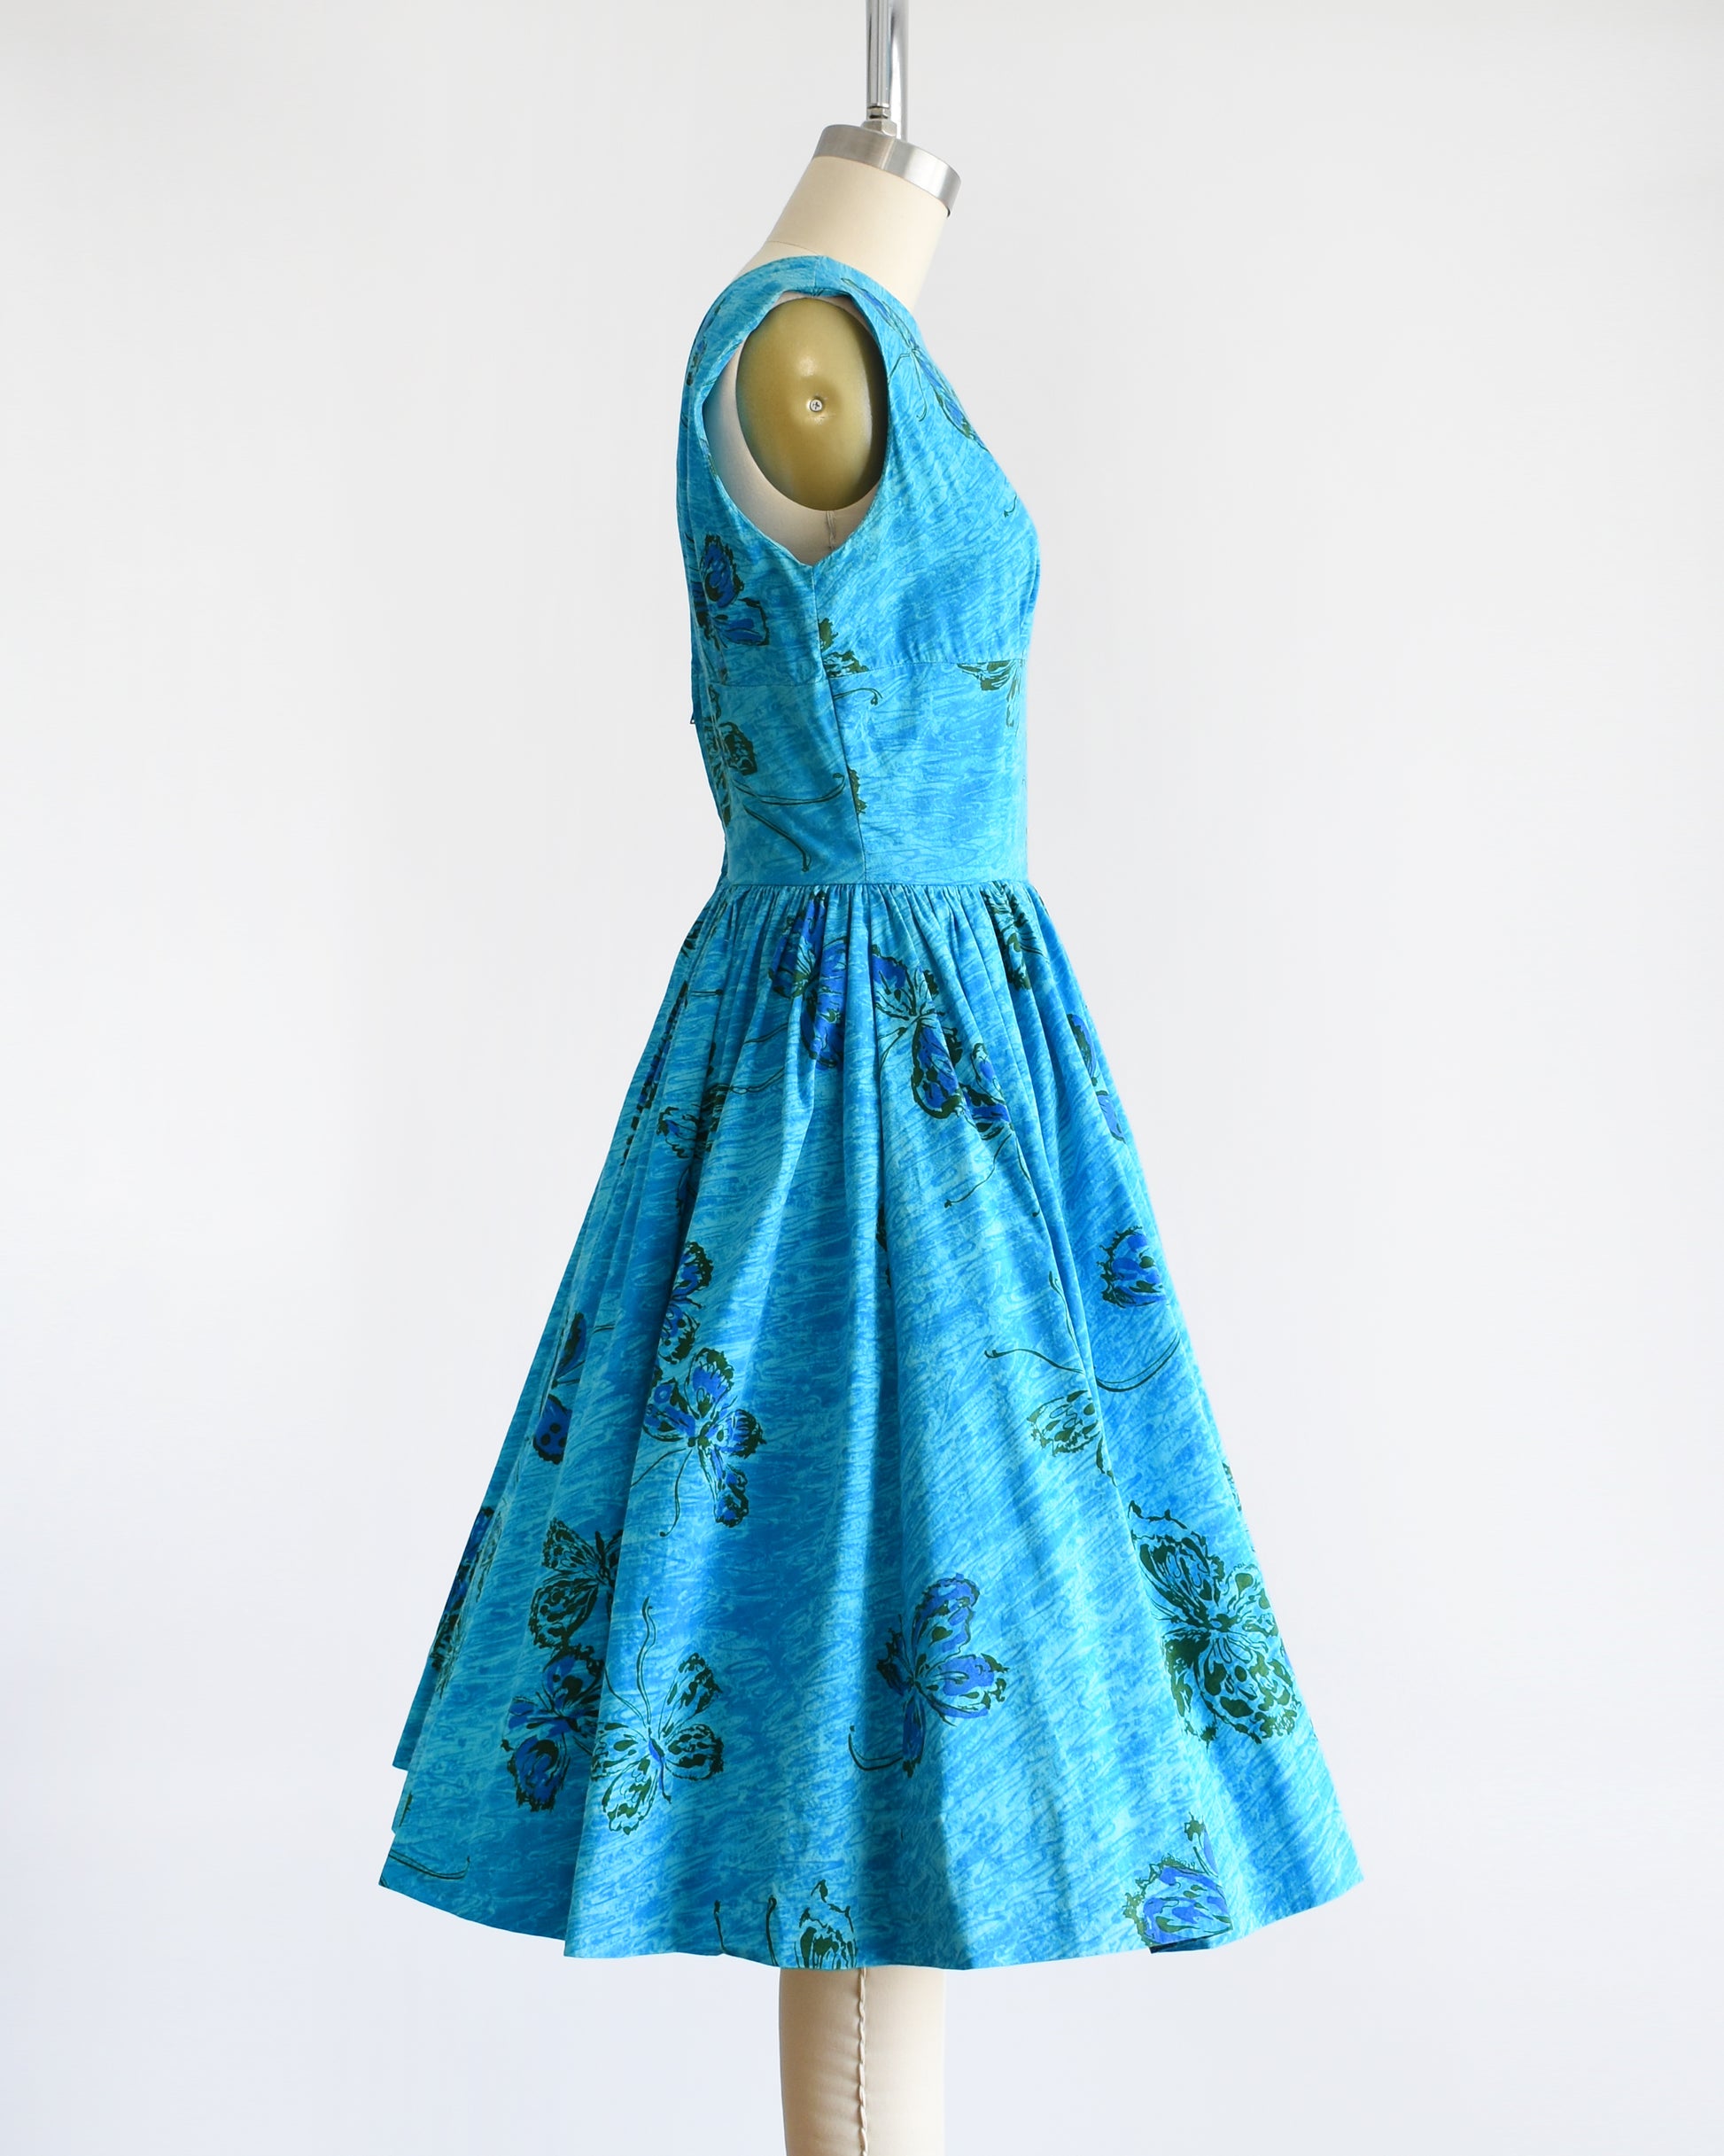 Side view of a vintage 1950s Anne Fogarty blue fit and flare dress that has a butterfly print. The dress is on a dress form.